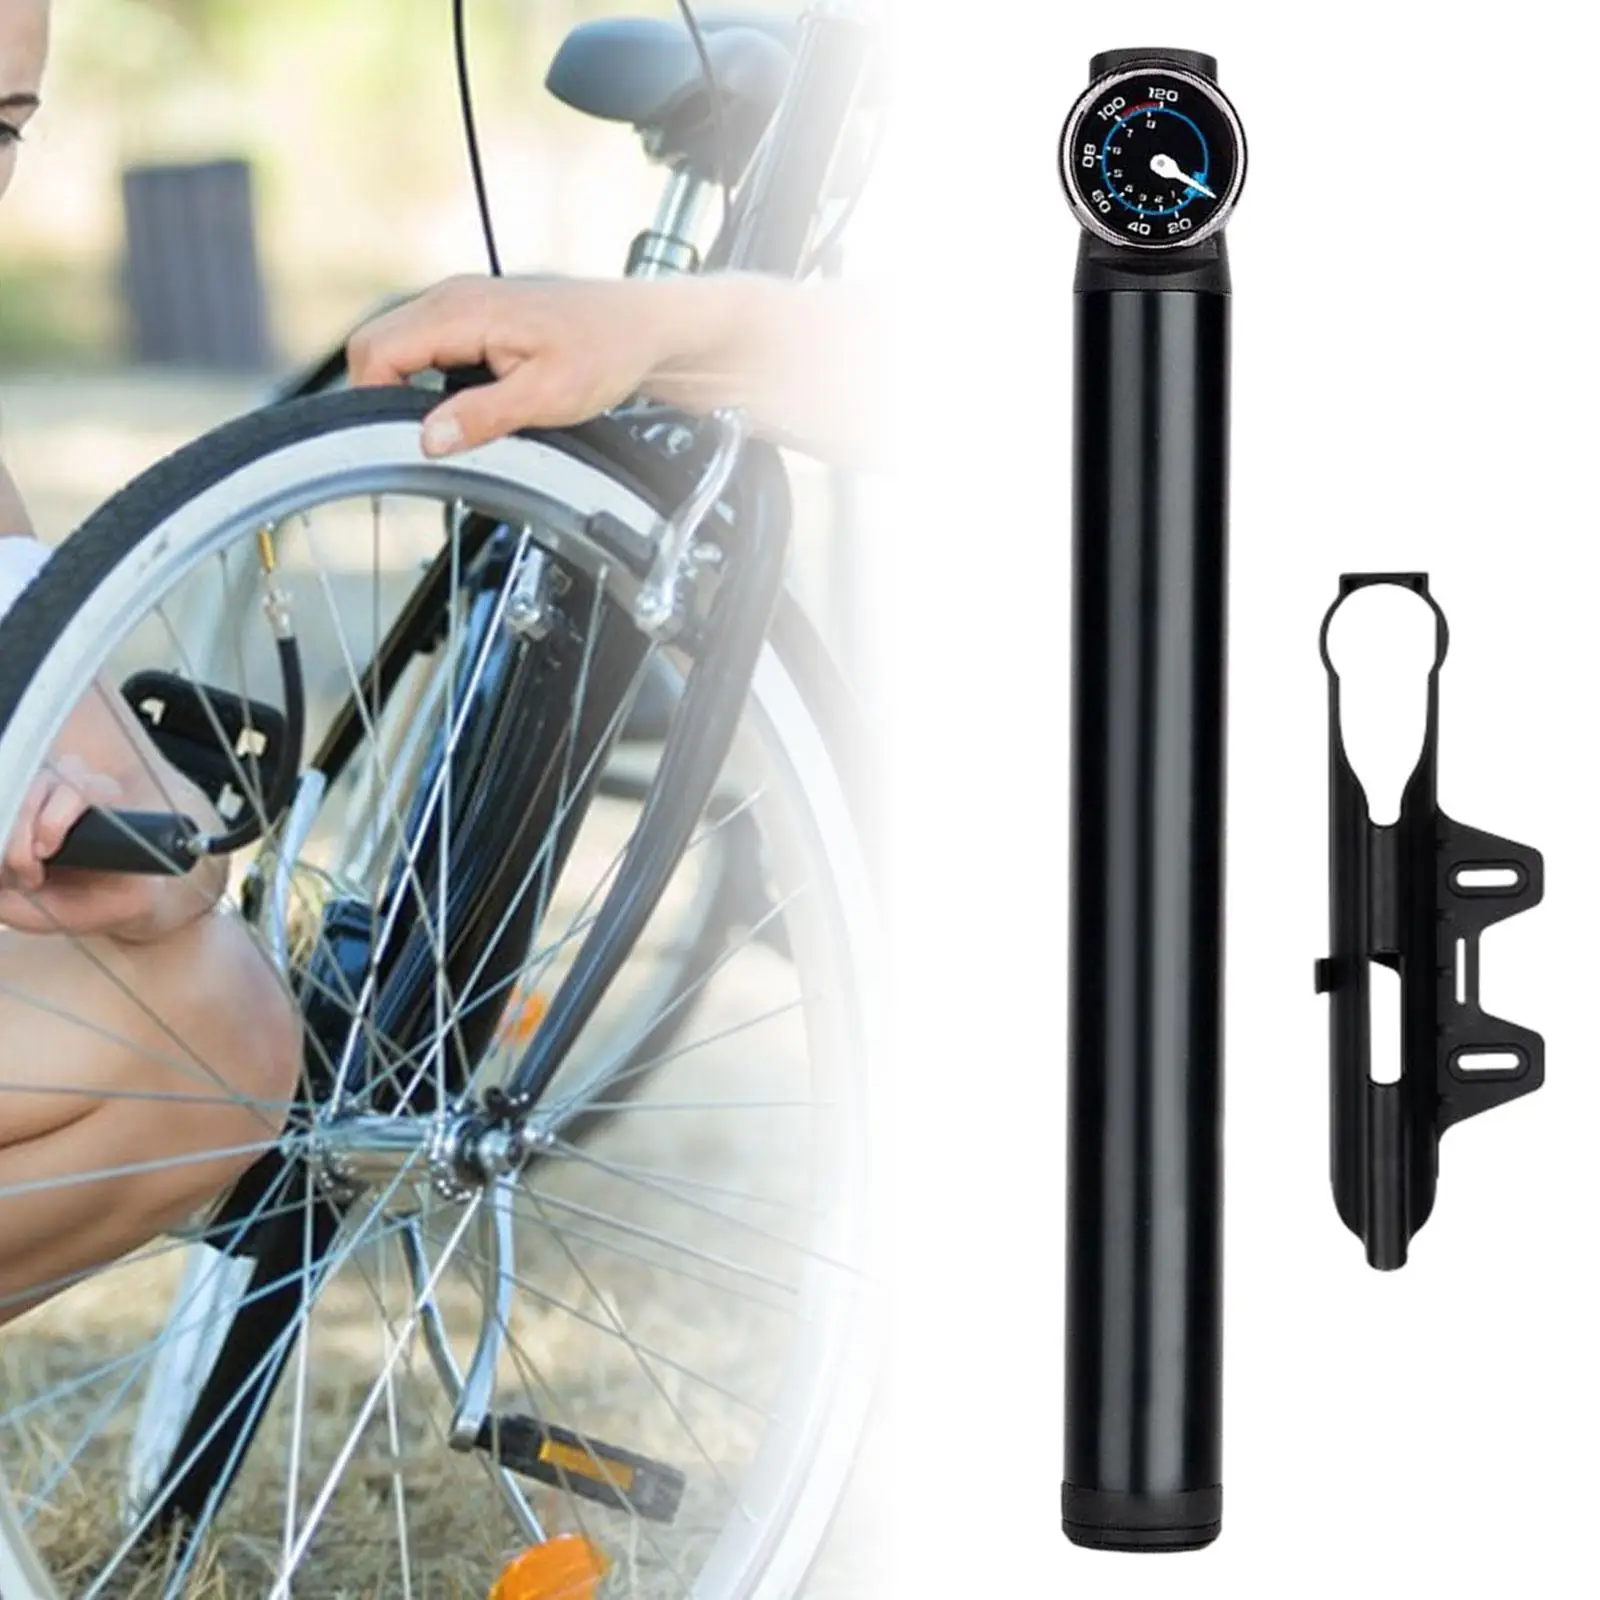 Mini Bike Pumps 120PSI High Pressure with Gauge Portable Bicycle Pump Bike Tire Pump for Cycling Travel